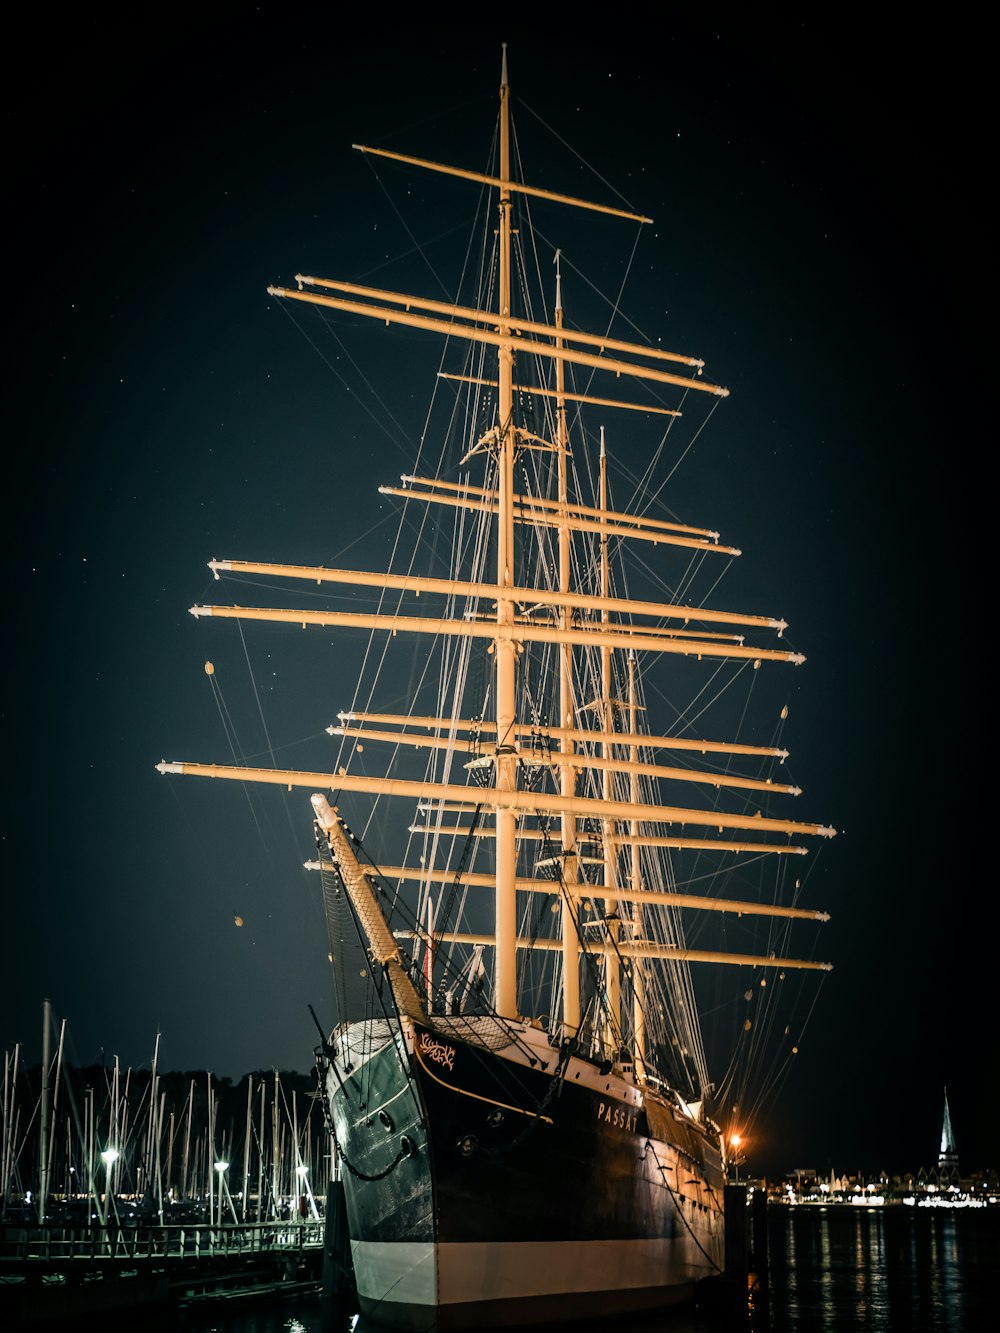 black and white ship on sea during night time